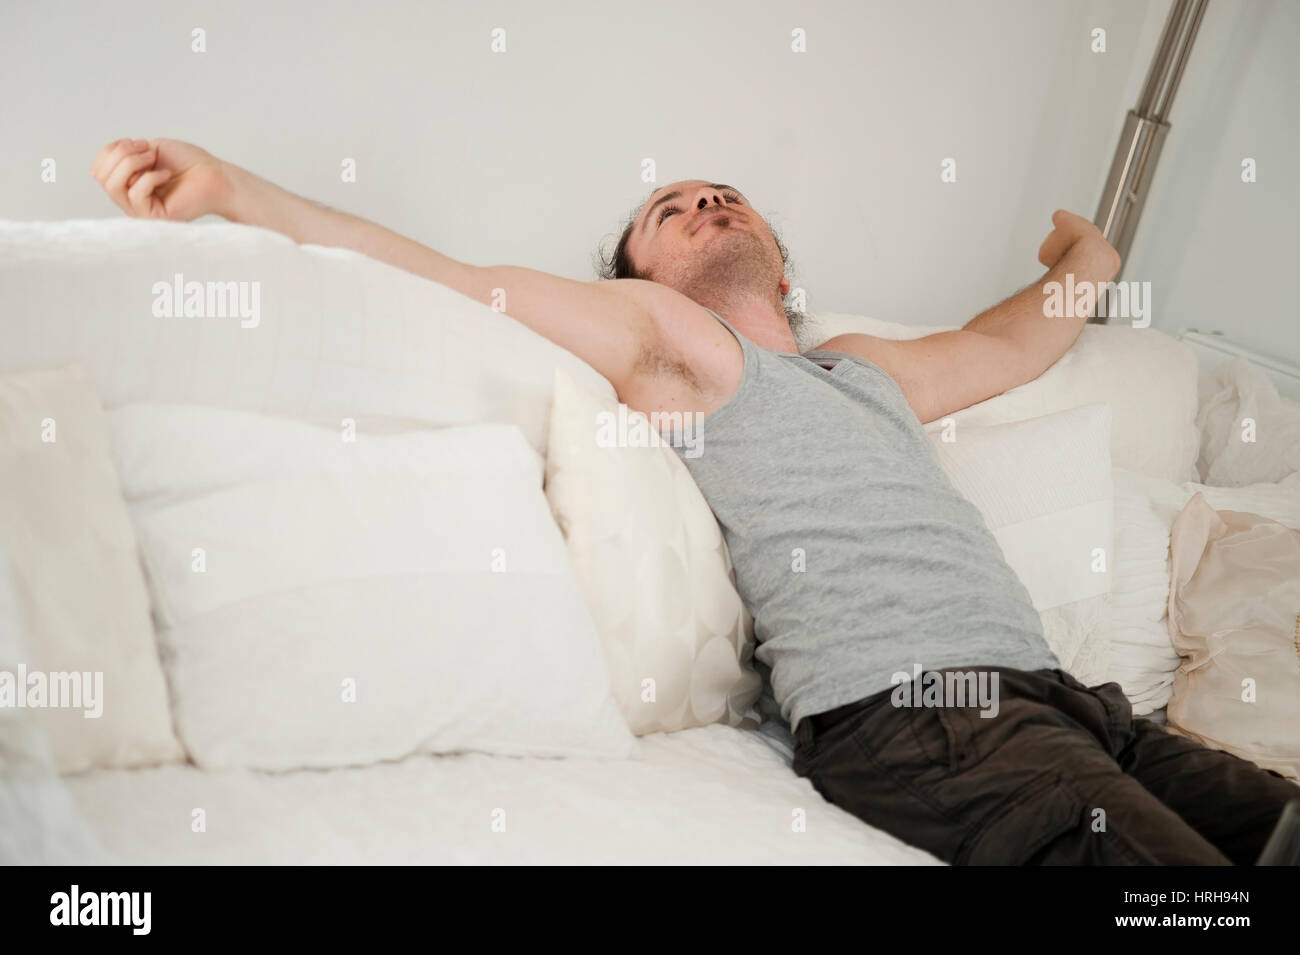 Model released, Junger Mann sitzt auf Couch und streckt sich - man relaxing on a couch Stock Photo